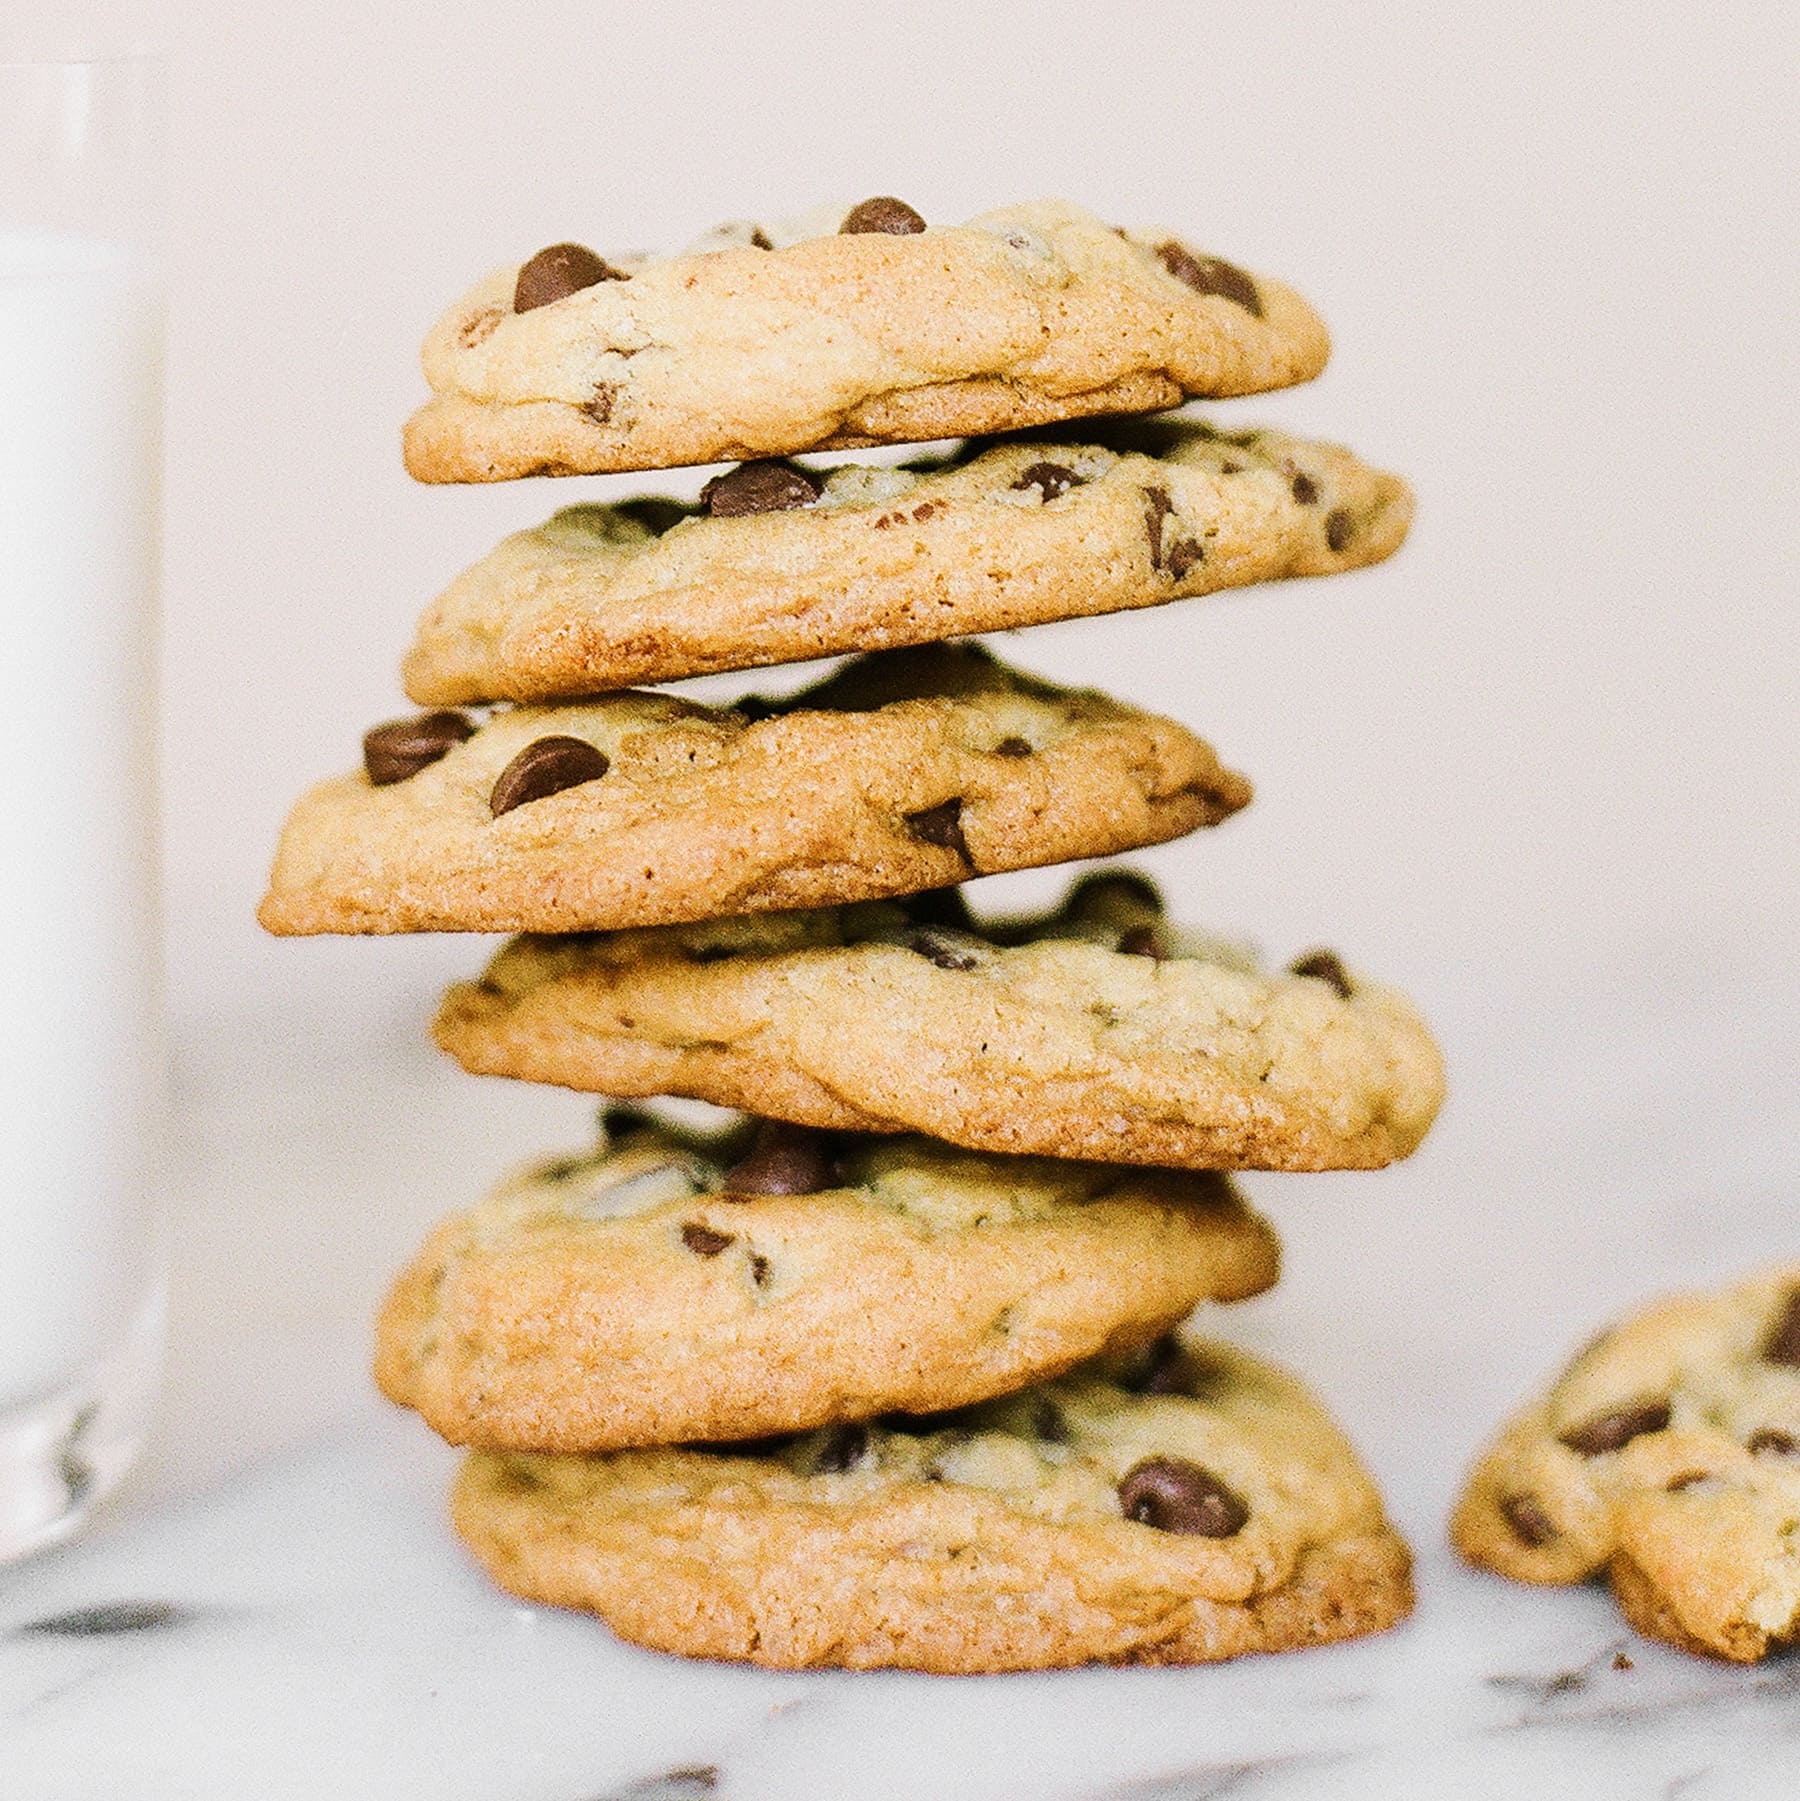 Ultimate Chocolate Chip Cookies are big, thick, chewy, soft in the middle, crisp at the edges, and chock full of chocolate chips!